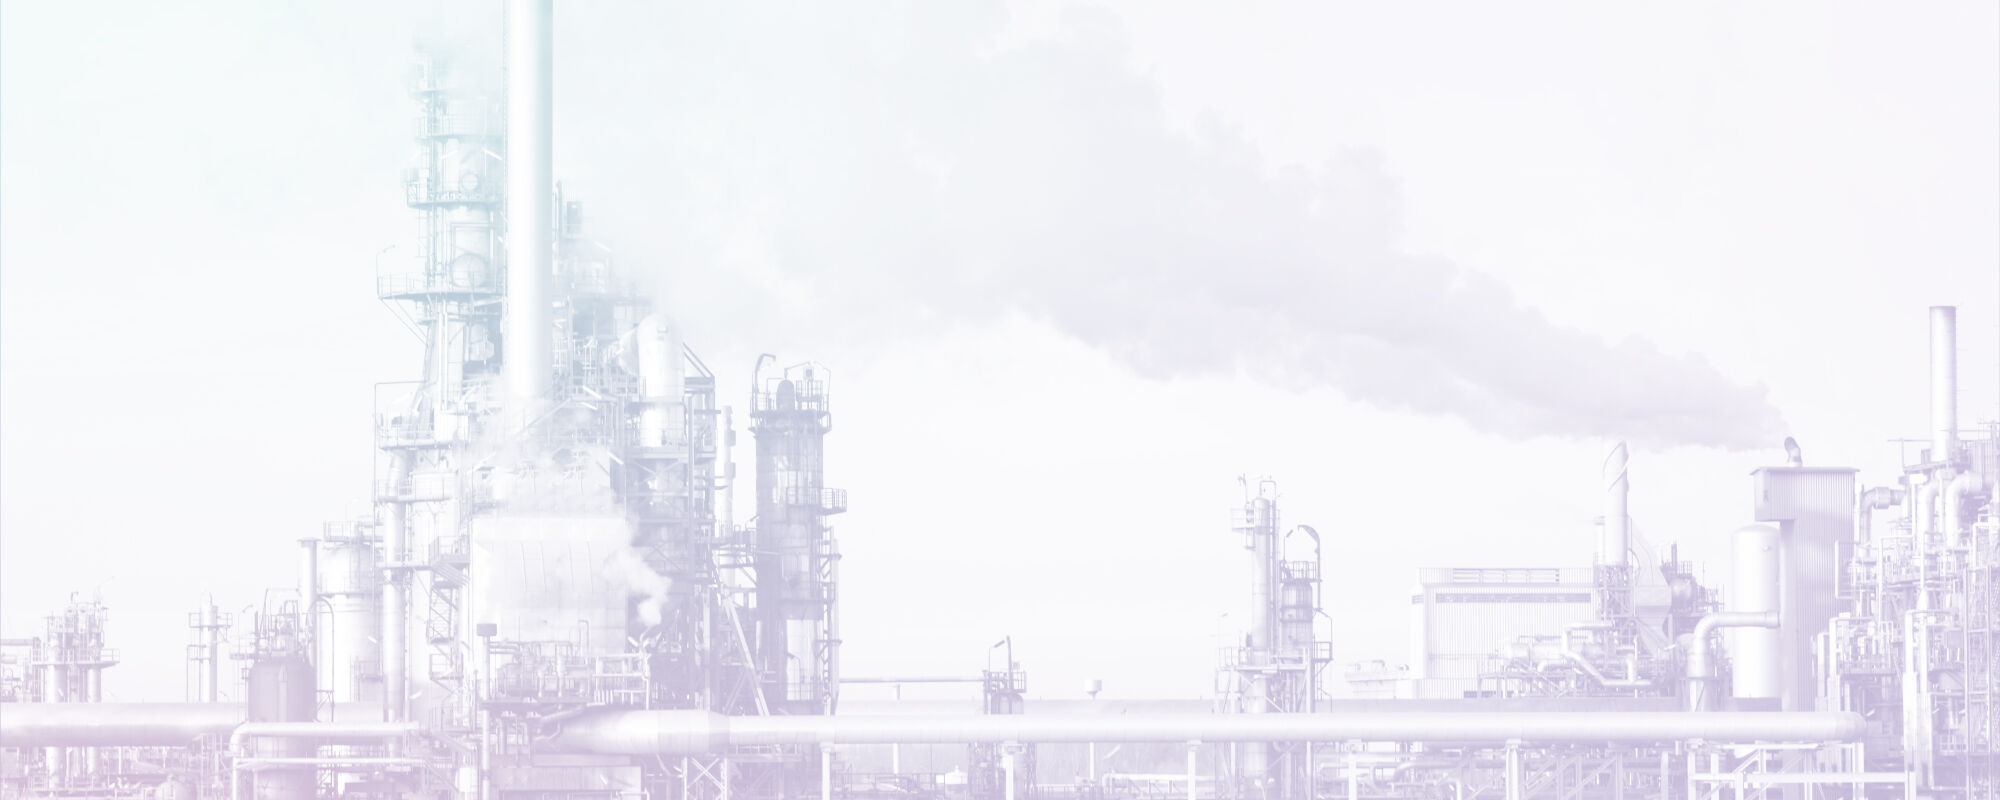 Toxic chemical plant spewing out toxic clouds in purples blues and greens - MosaicDX